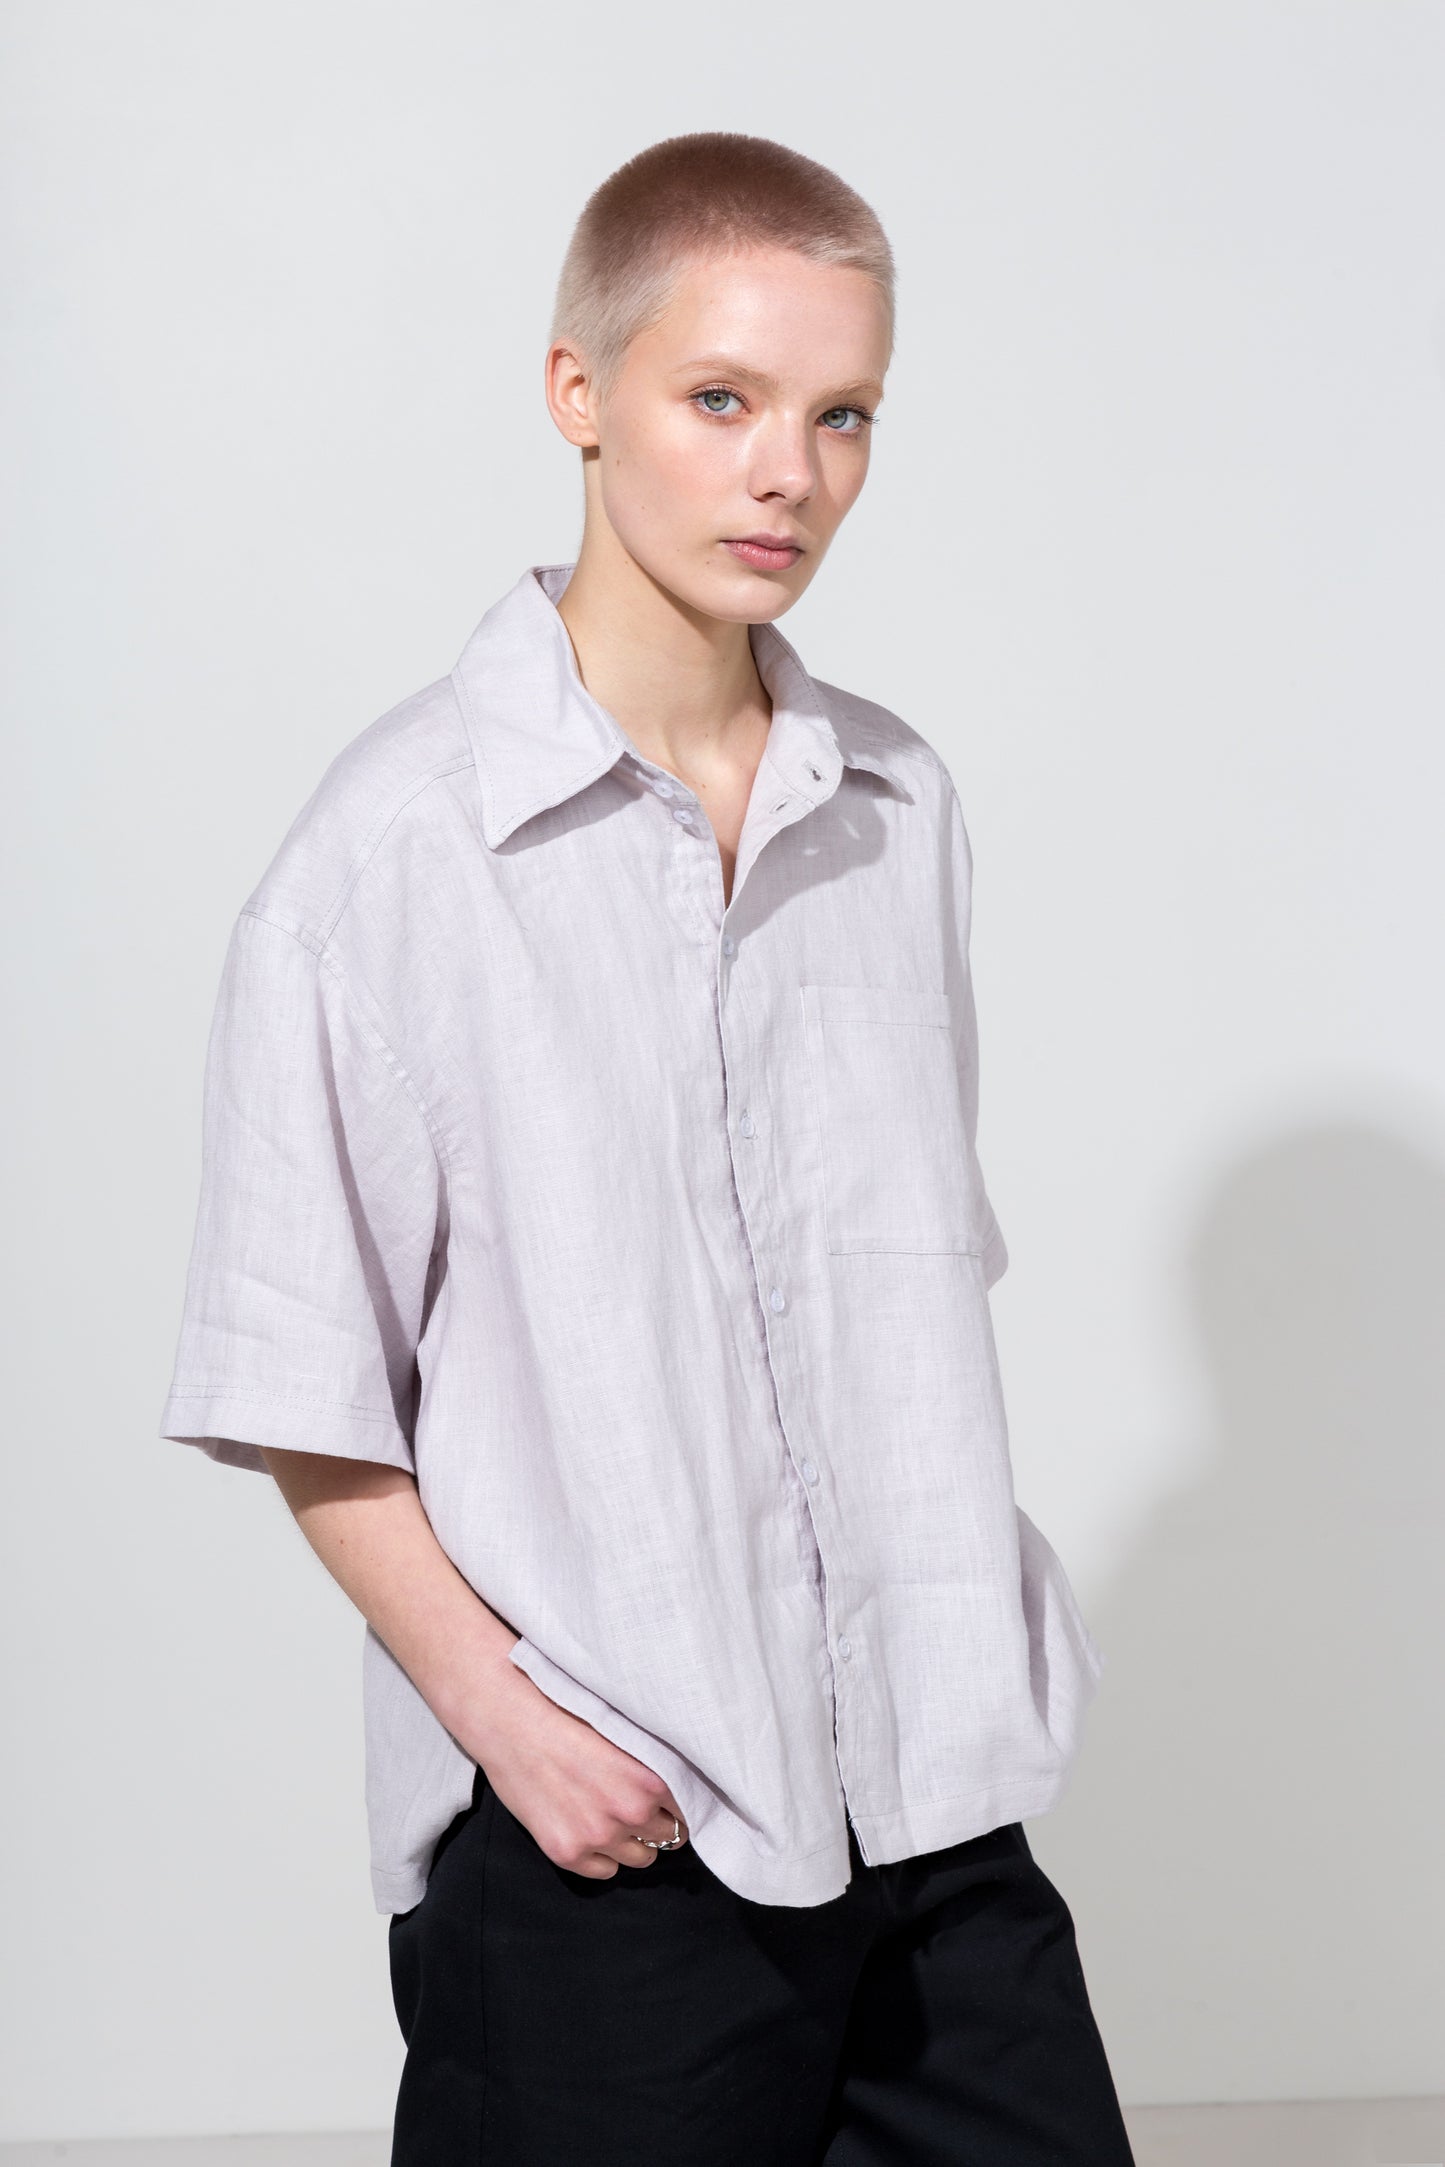 Relaxed short sleeve shirt in beige linen and black workwear trousers